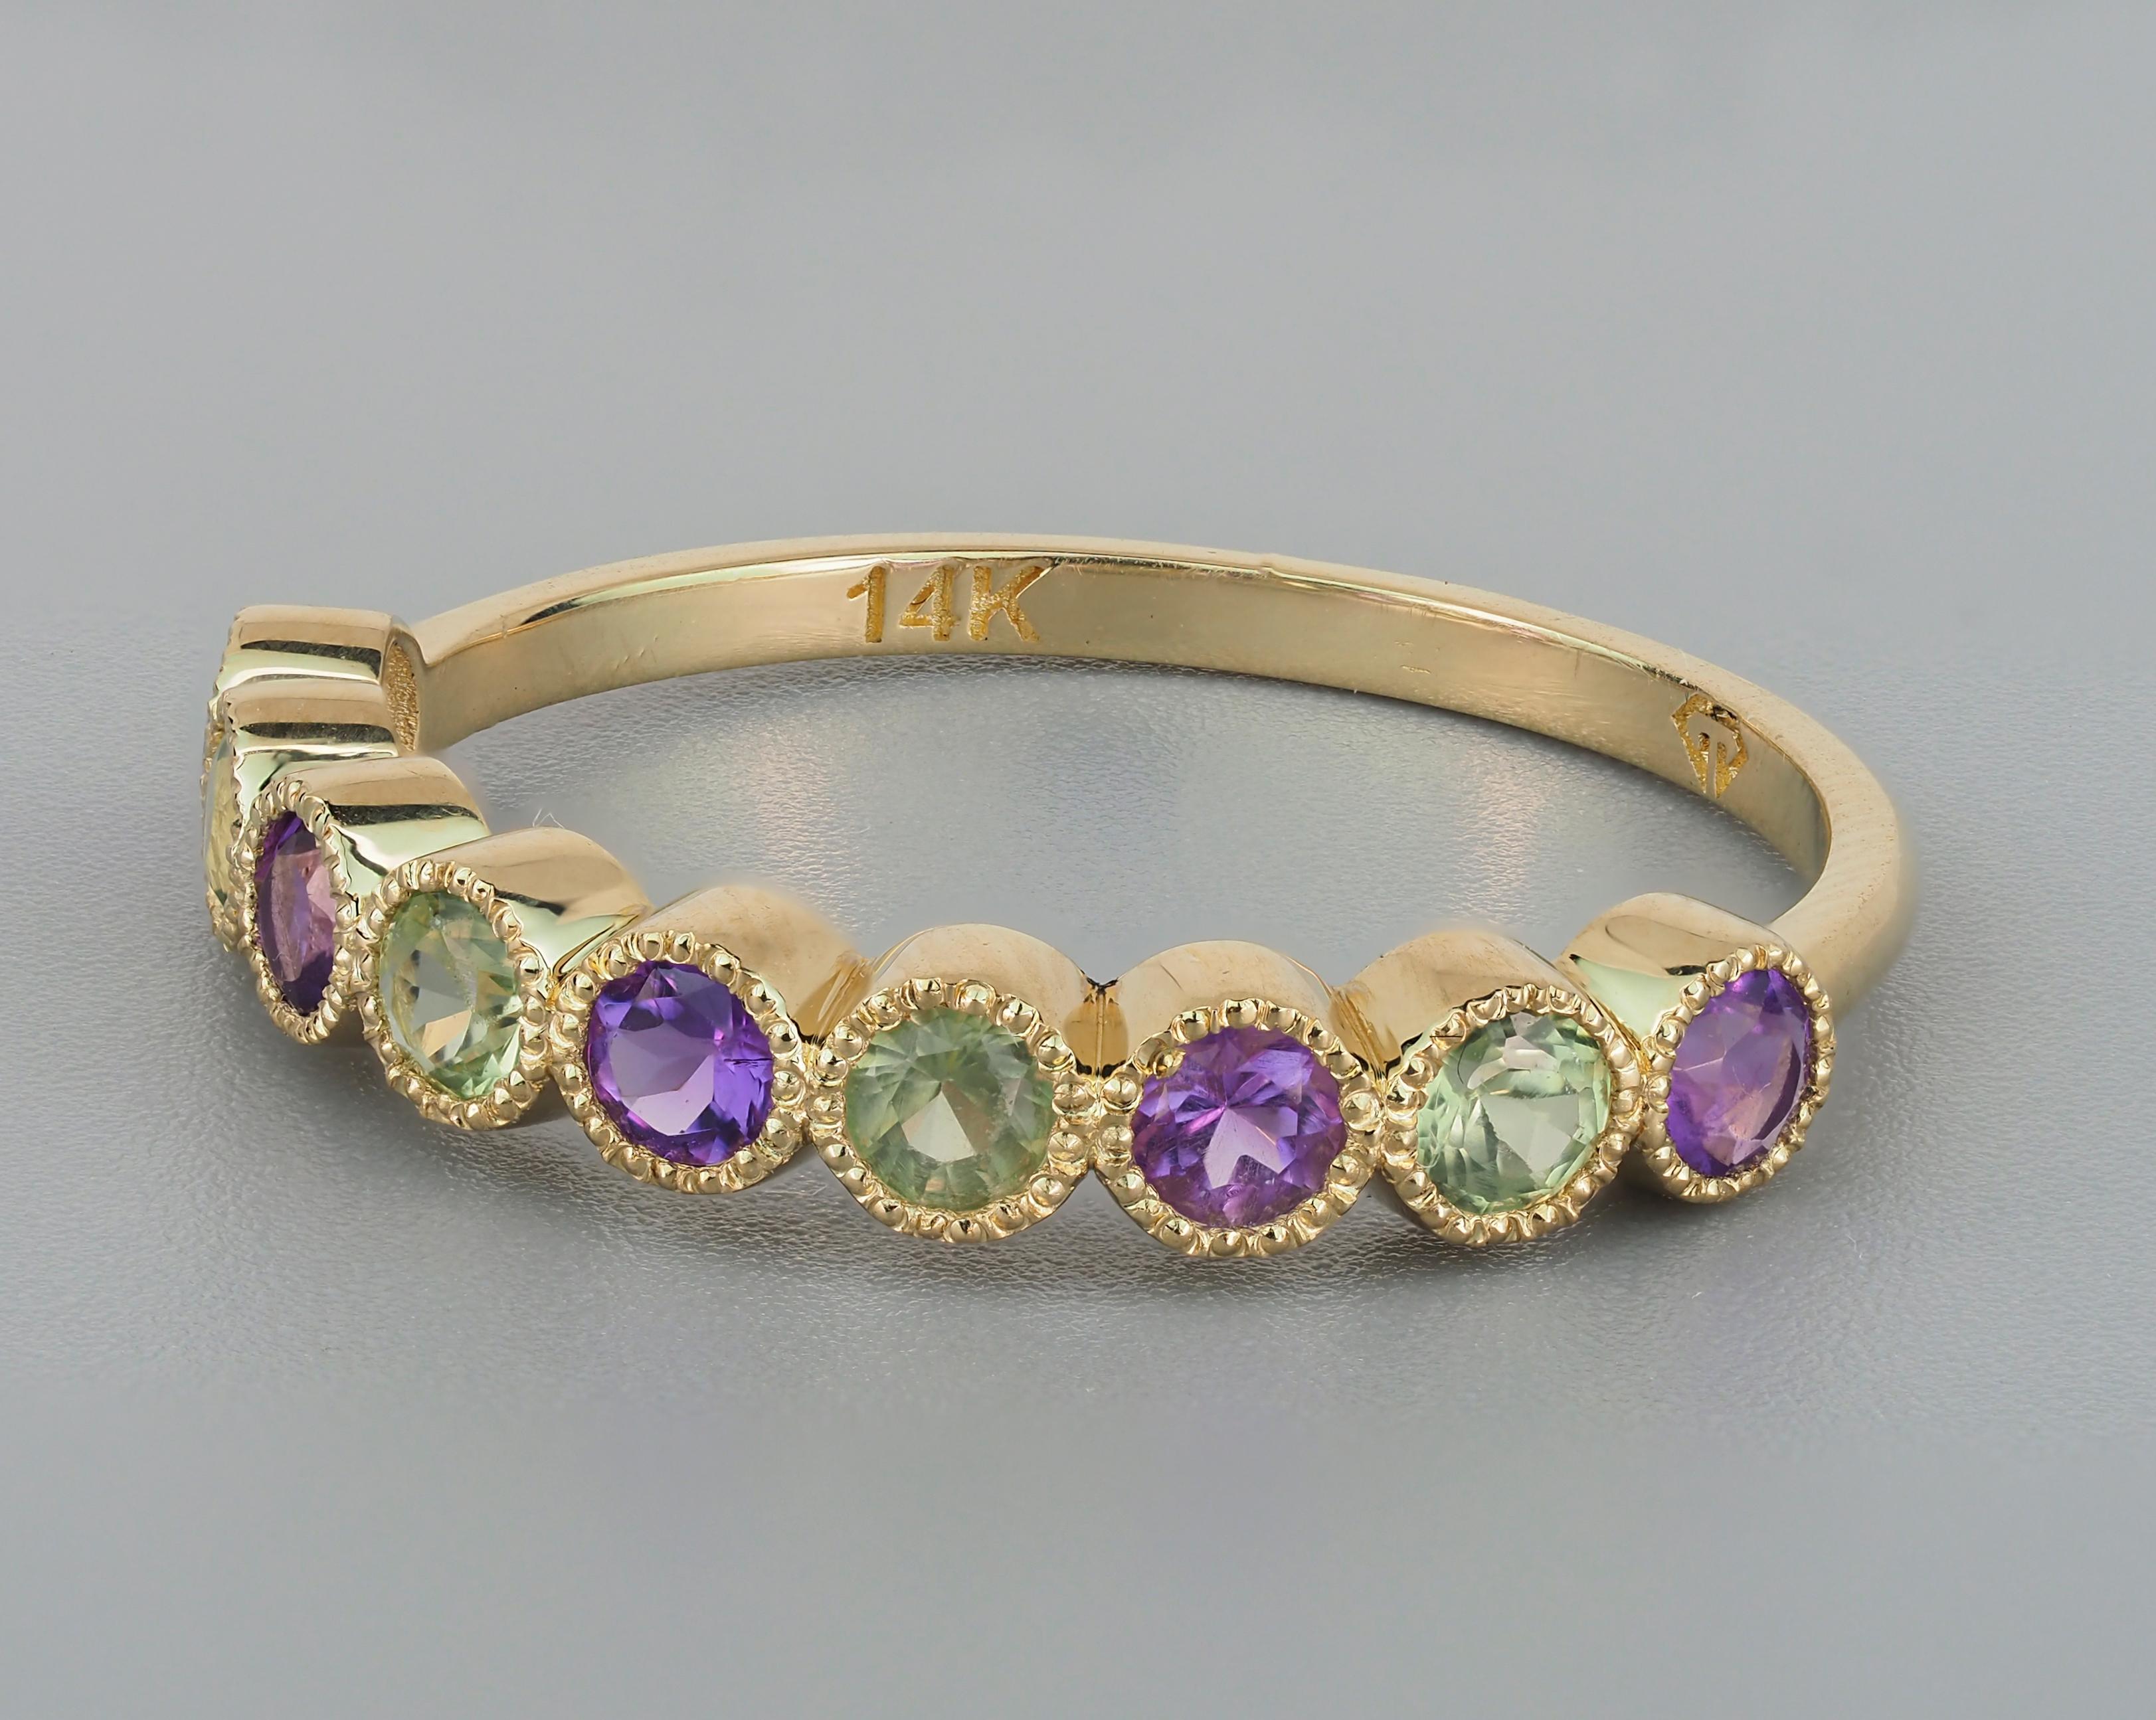 For Sale:  Green Sapphire, Amethyst Pave 14k gold half eternity Band. 8